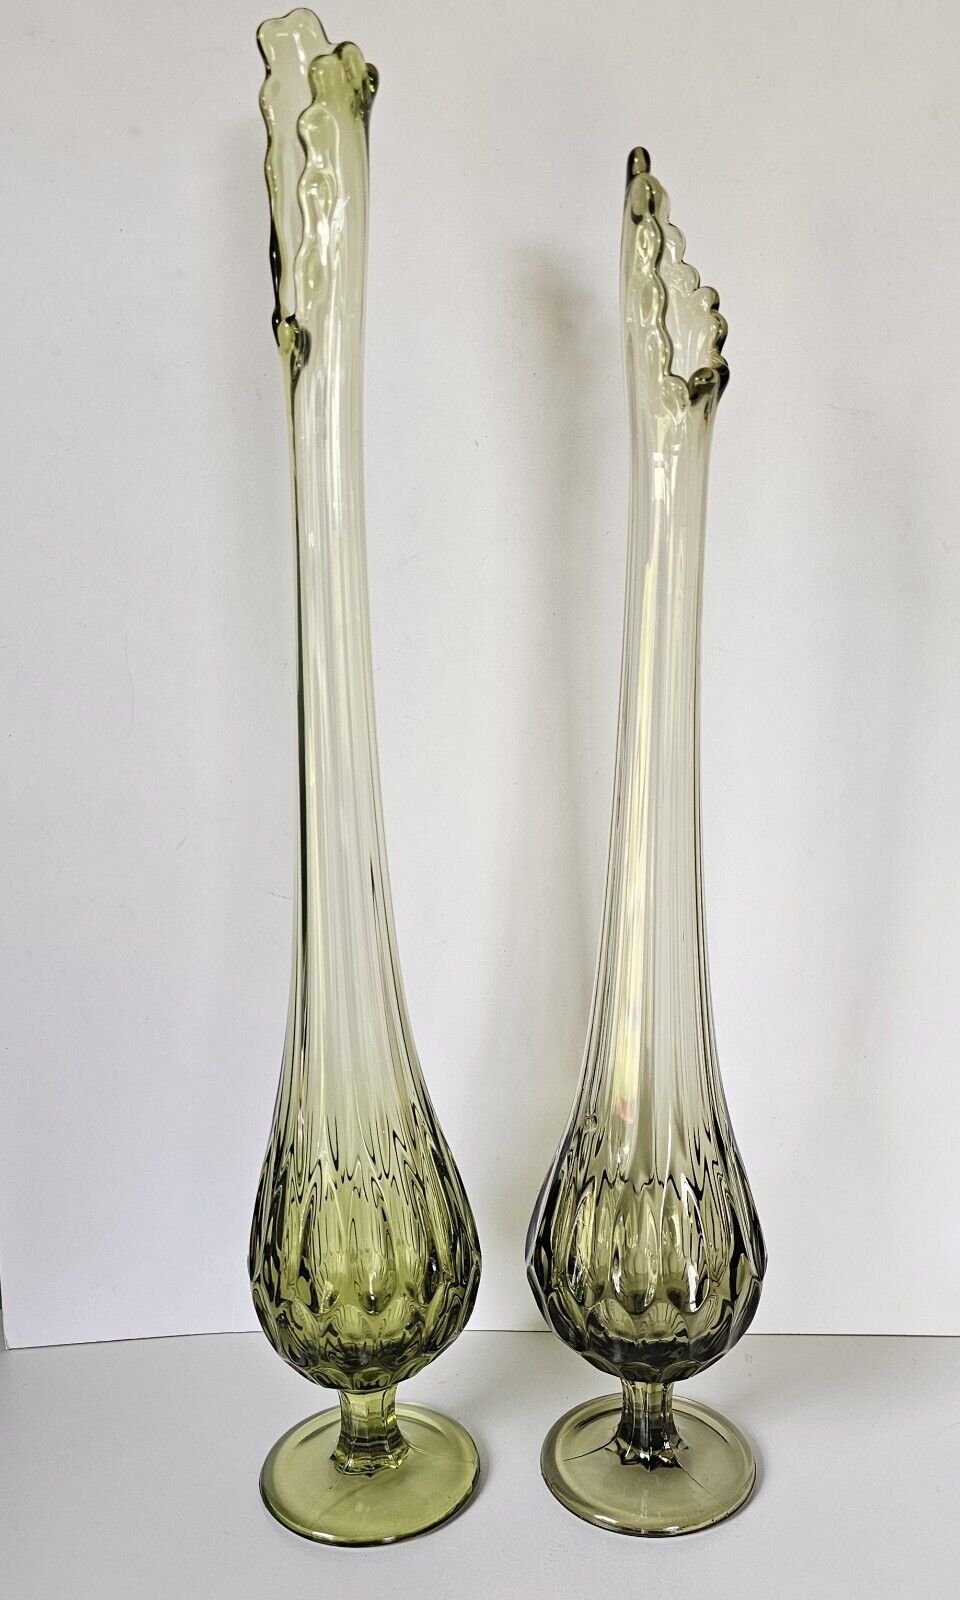 2 Pc Vintage Green Olive Stretch Fenton Footed Swung Glass Vase 19.5”